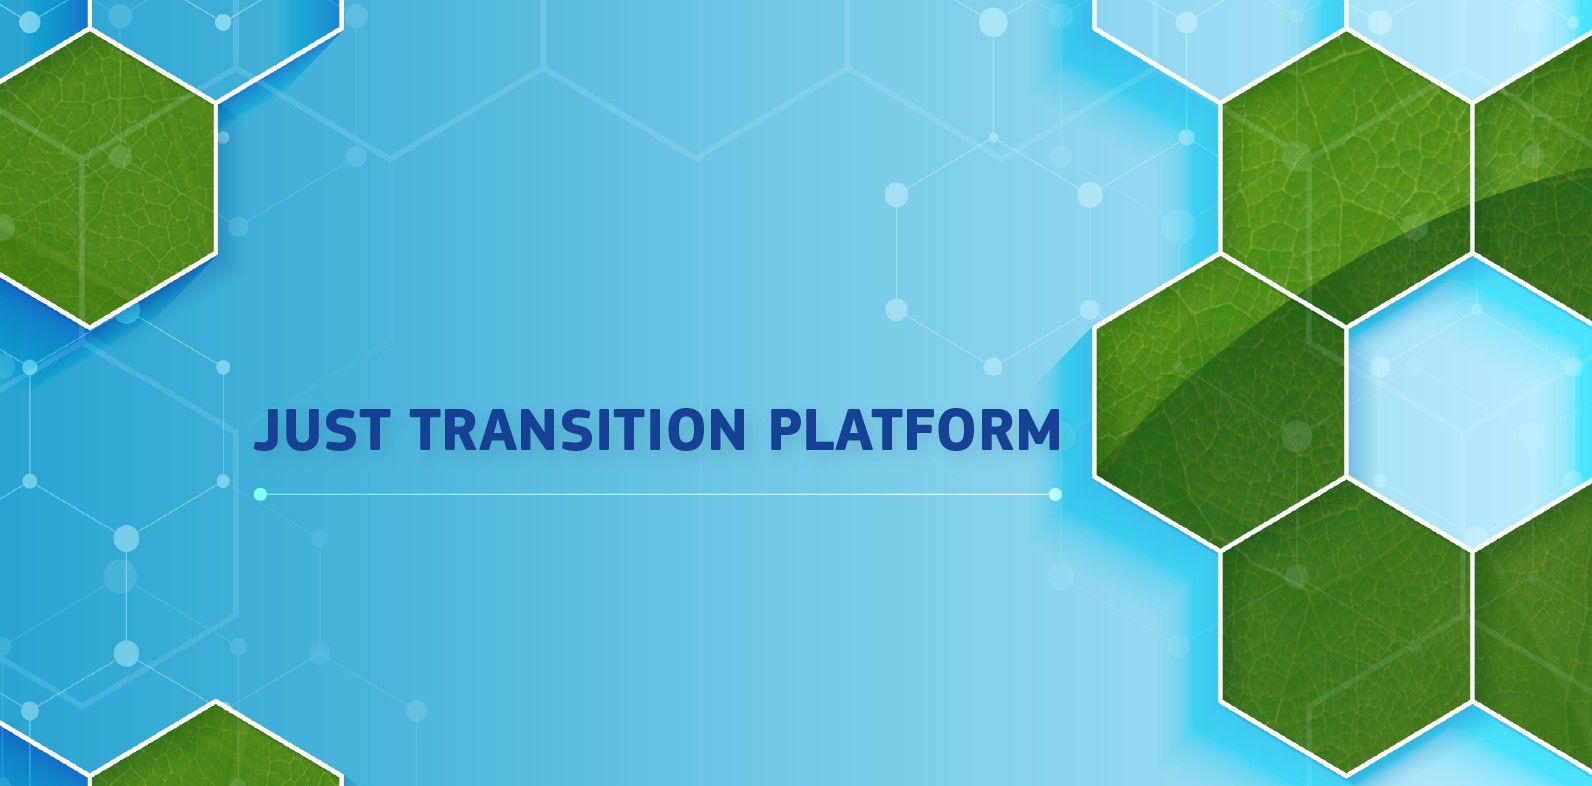 Just Transition: Share your good practices and projects